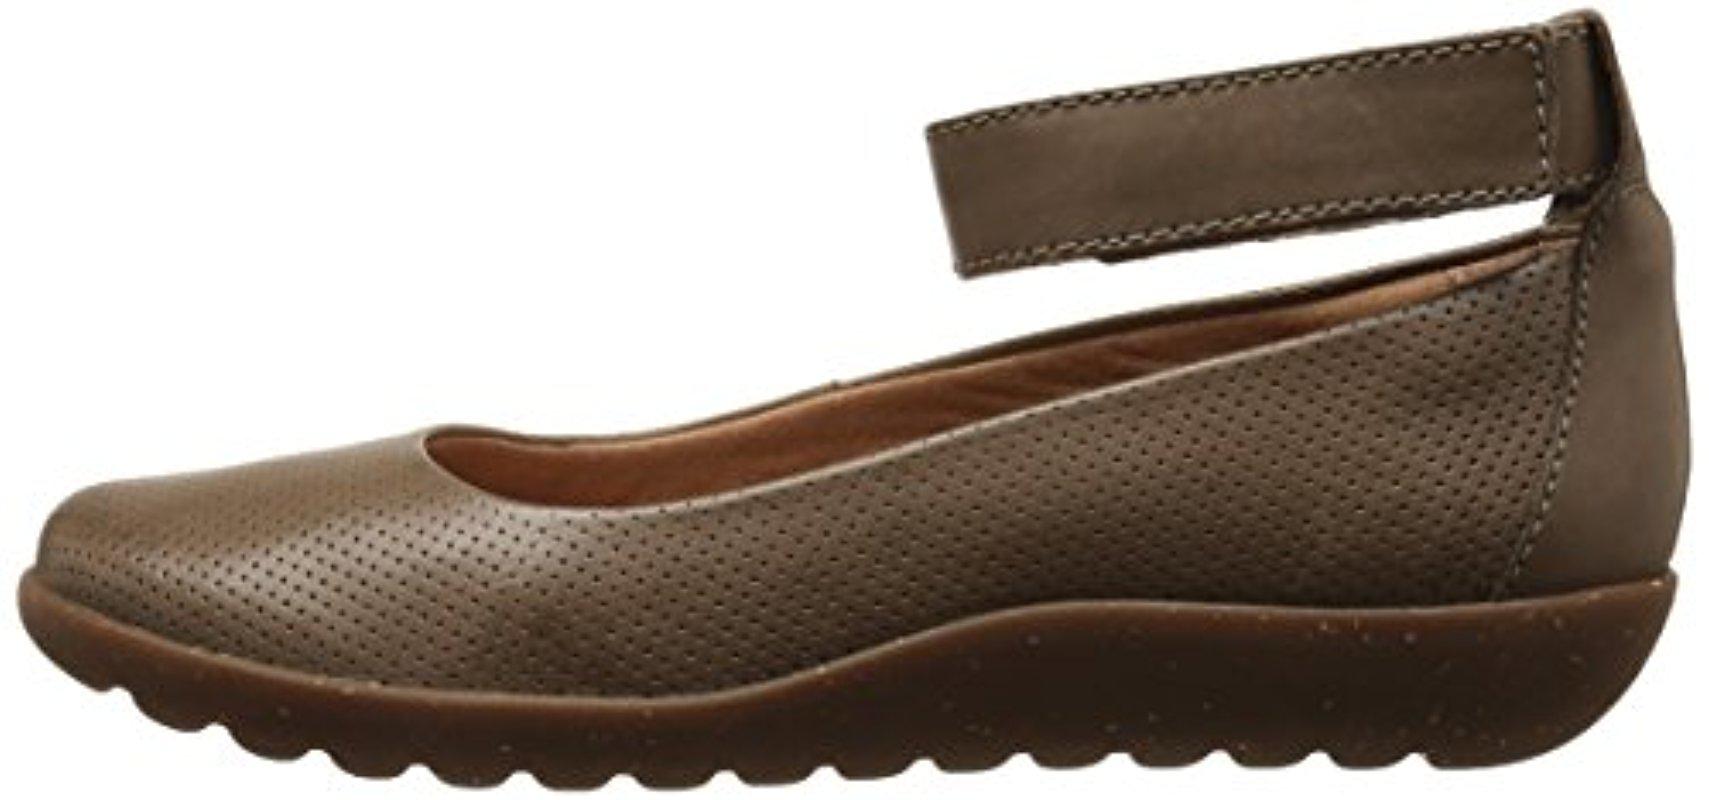 Clarks Leather Medora Nina Flat in Sage Leather (Brown) - Lyst